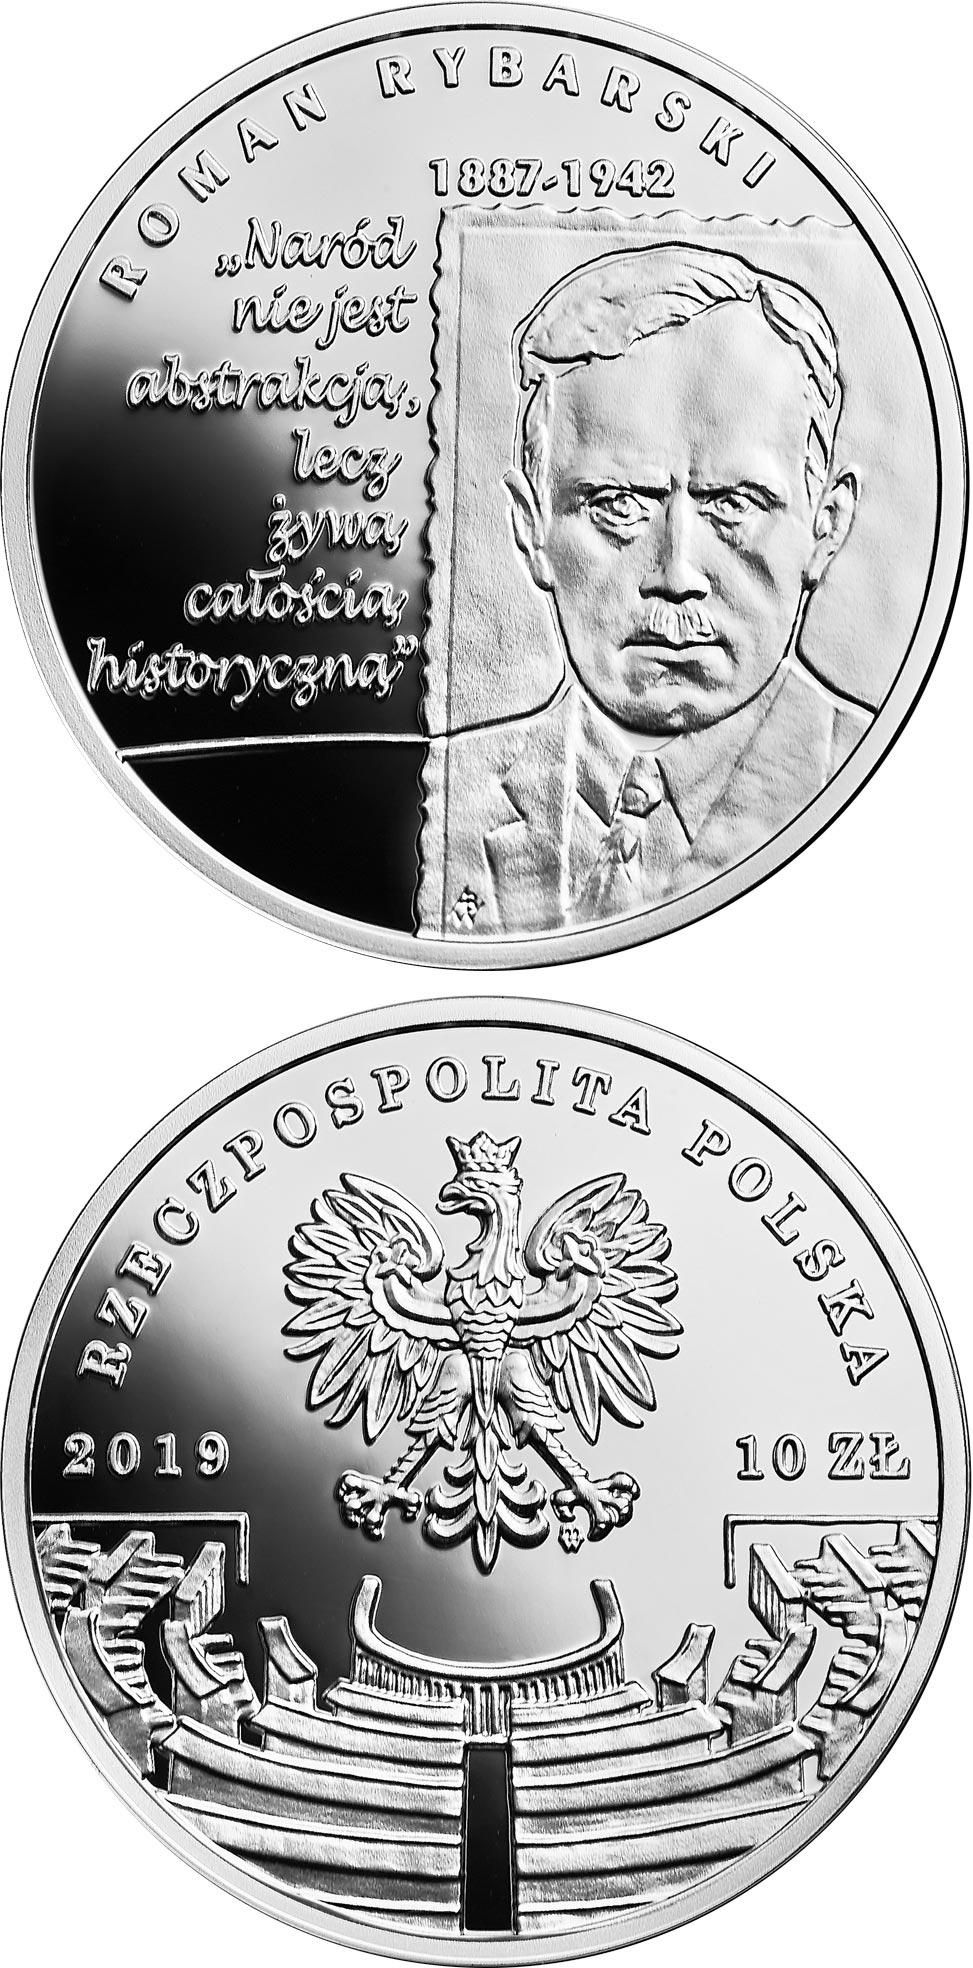 Image of 10 zloty coin - Roman Rybarski | Poland 2019.  The Silver coin is of Proof quality.